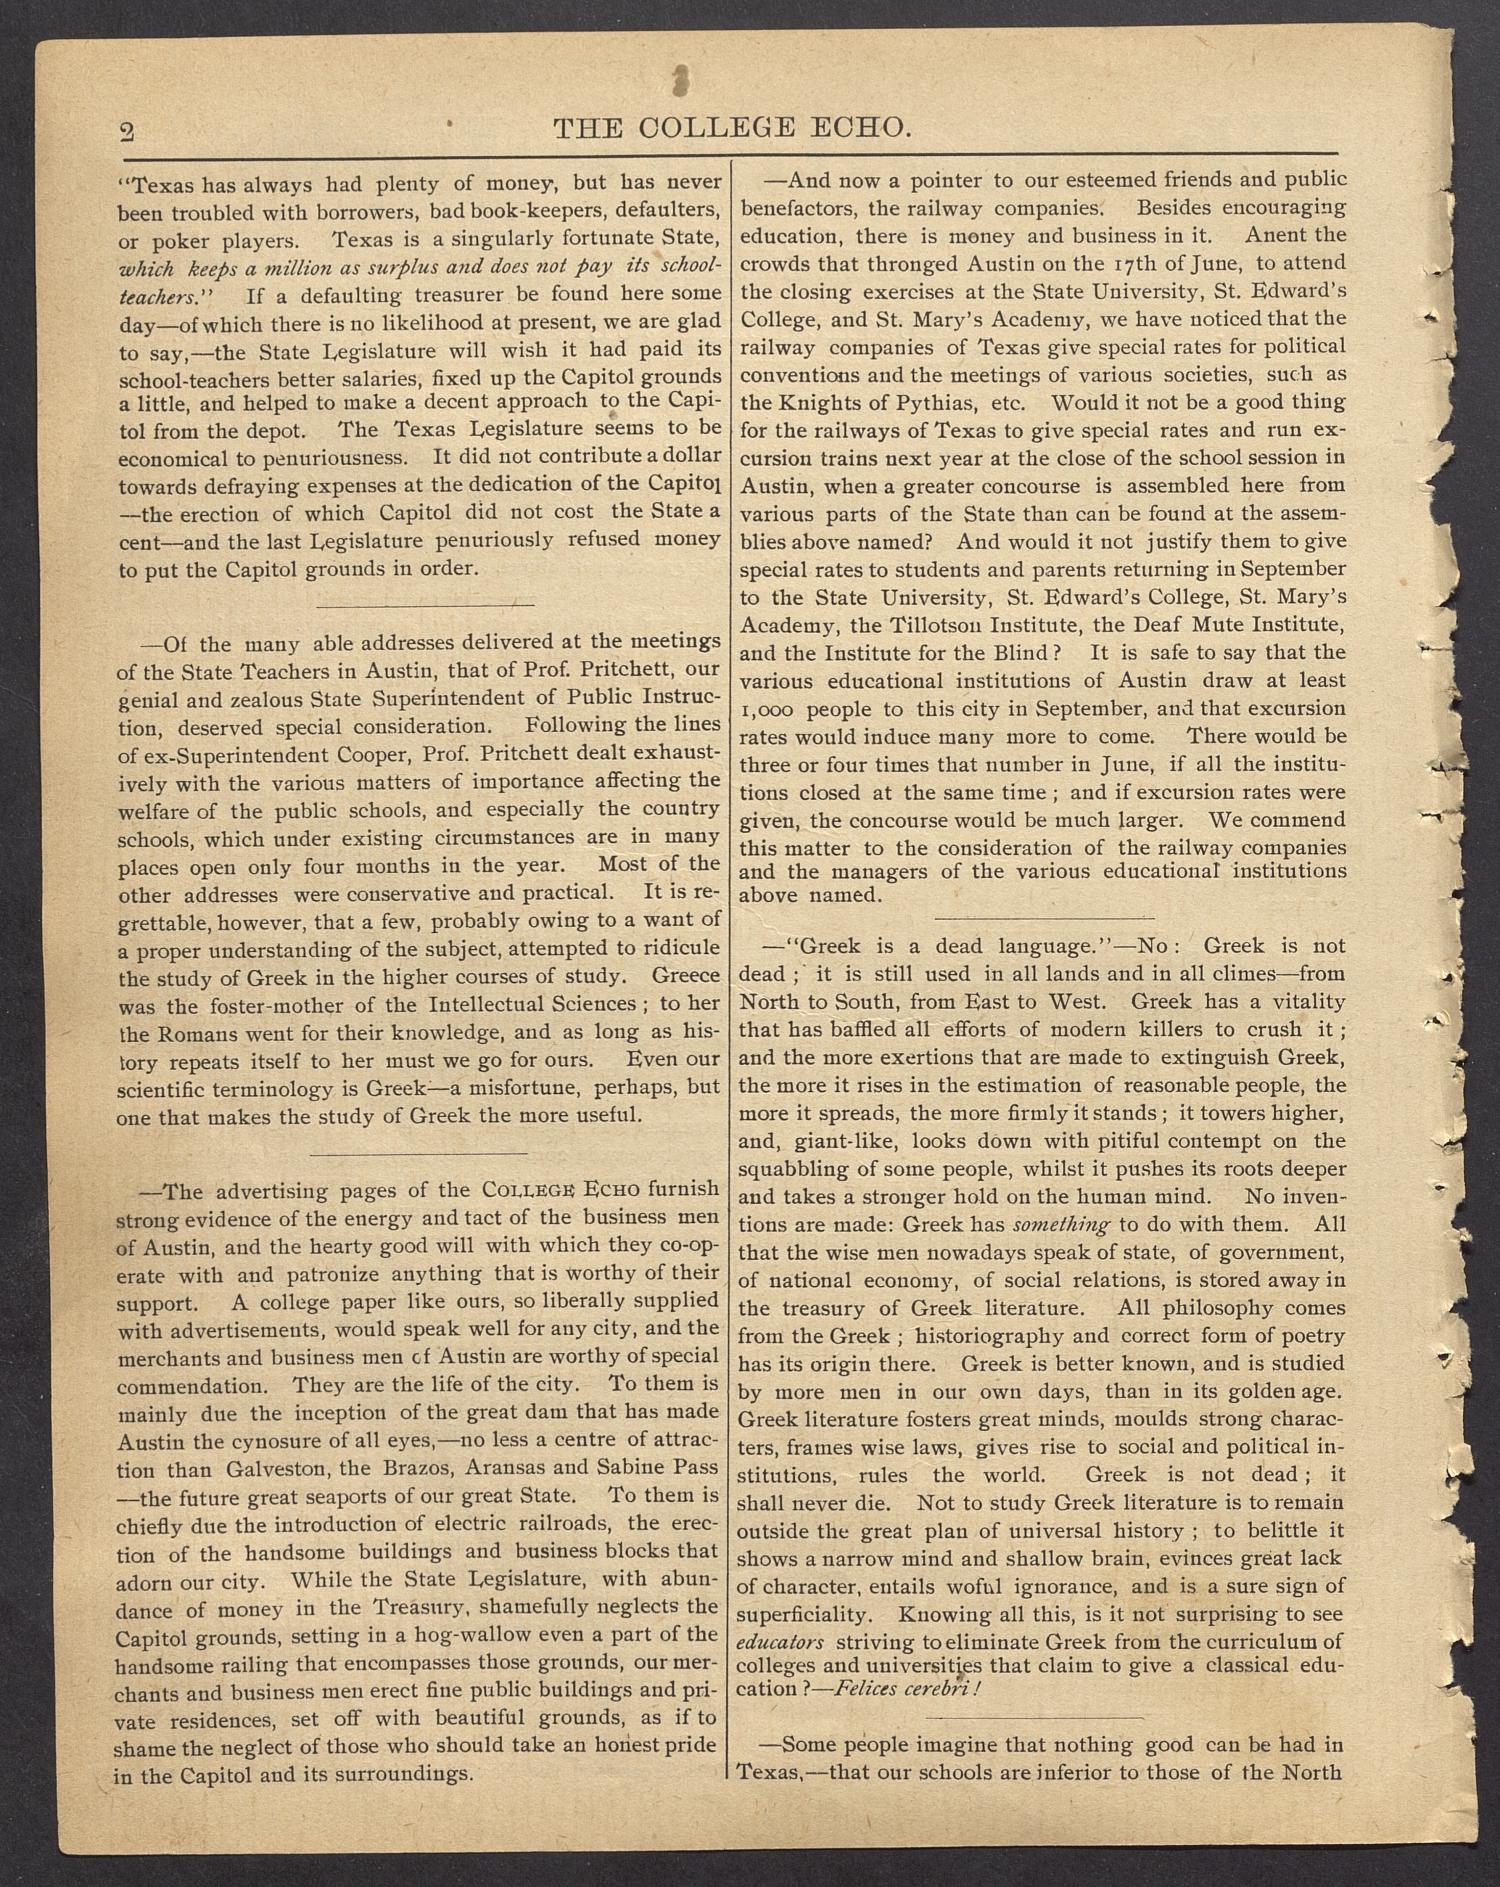 The College Echo. (Austin, Tex.), Vol. 4, No. 1, Ed. 1, July 1891
                                                
                                                    [Sequence #]: 2 of 18
                                                